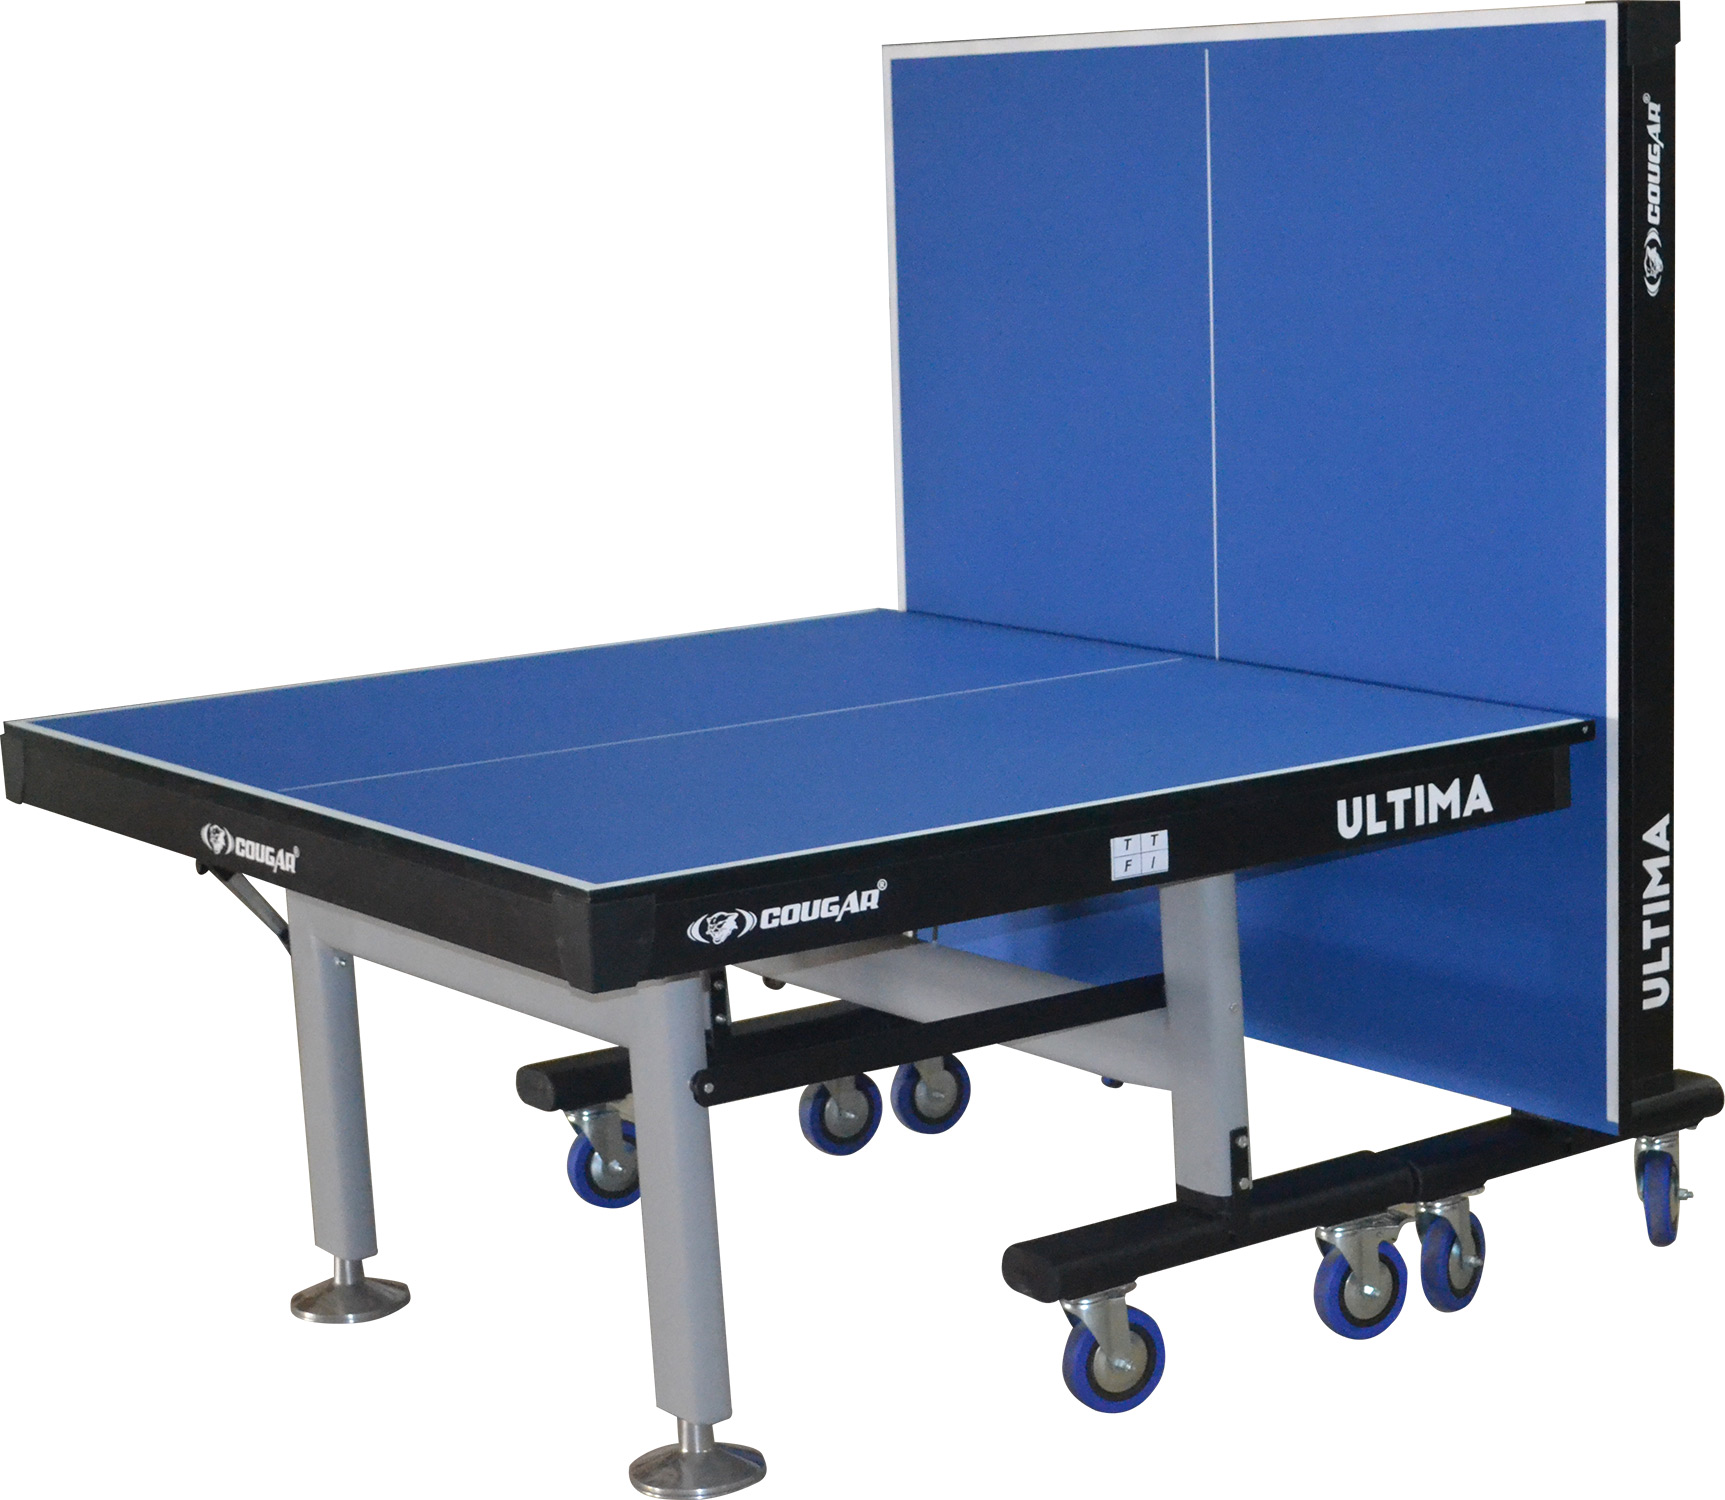 How to Select a Table Tennis Table?